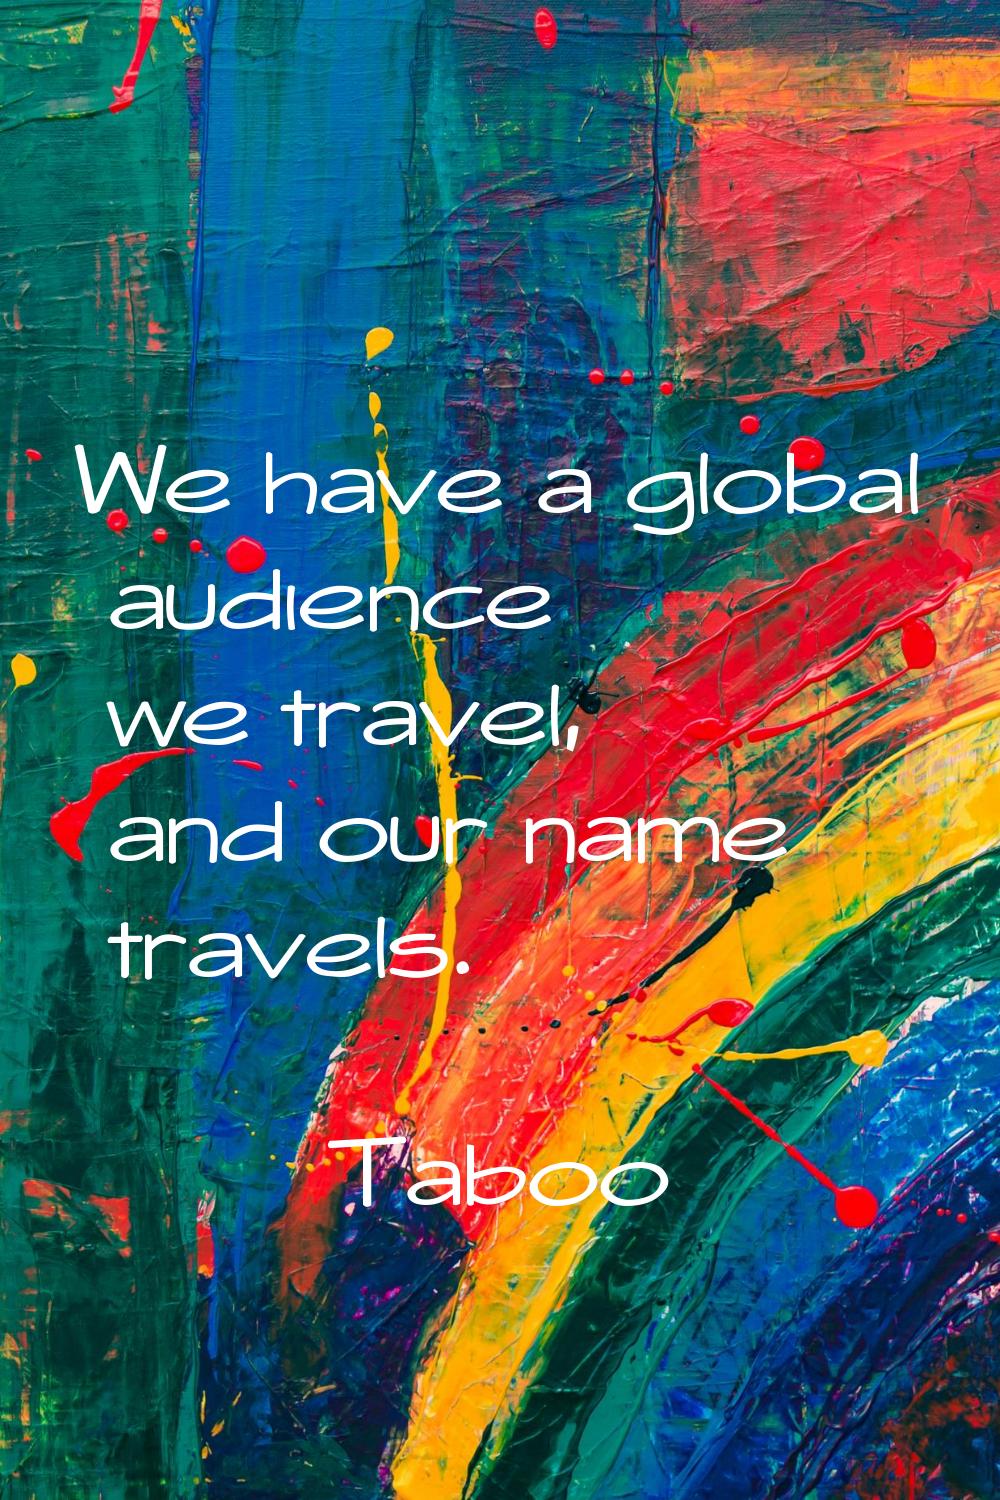 We have a global audience… we travel, and our name travels.